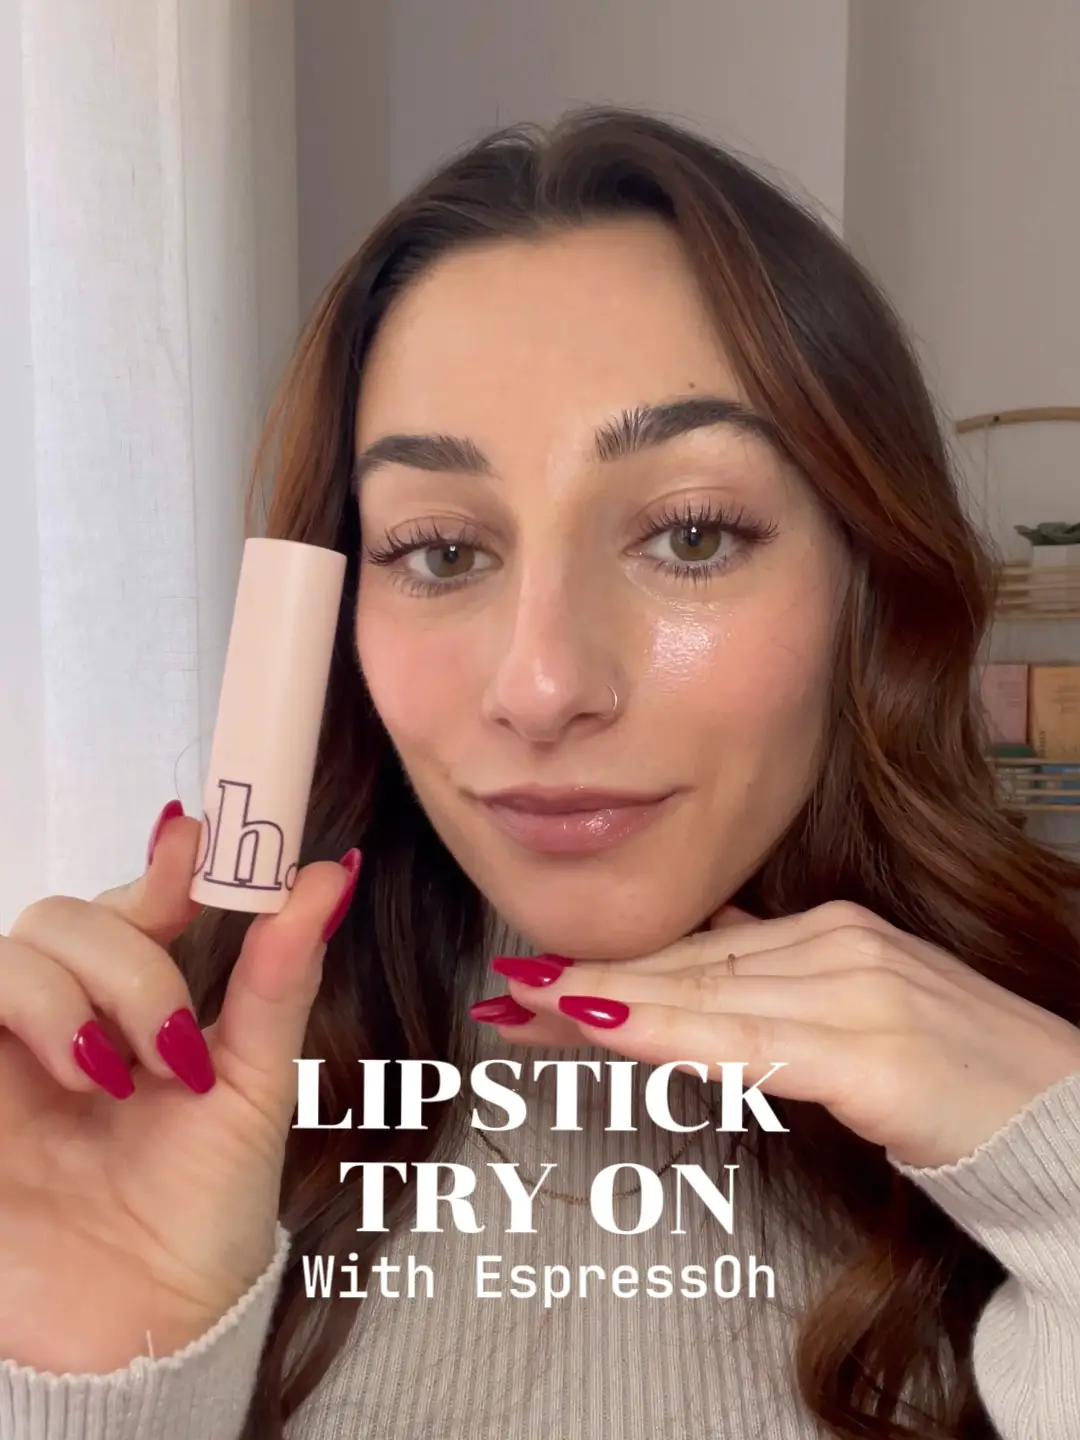 NEW lipstick try on with Espressoh 🫶🤎, Video published by Danielle